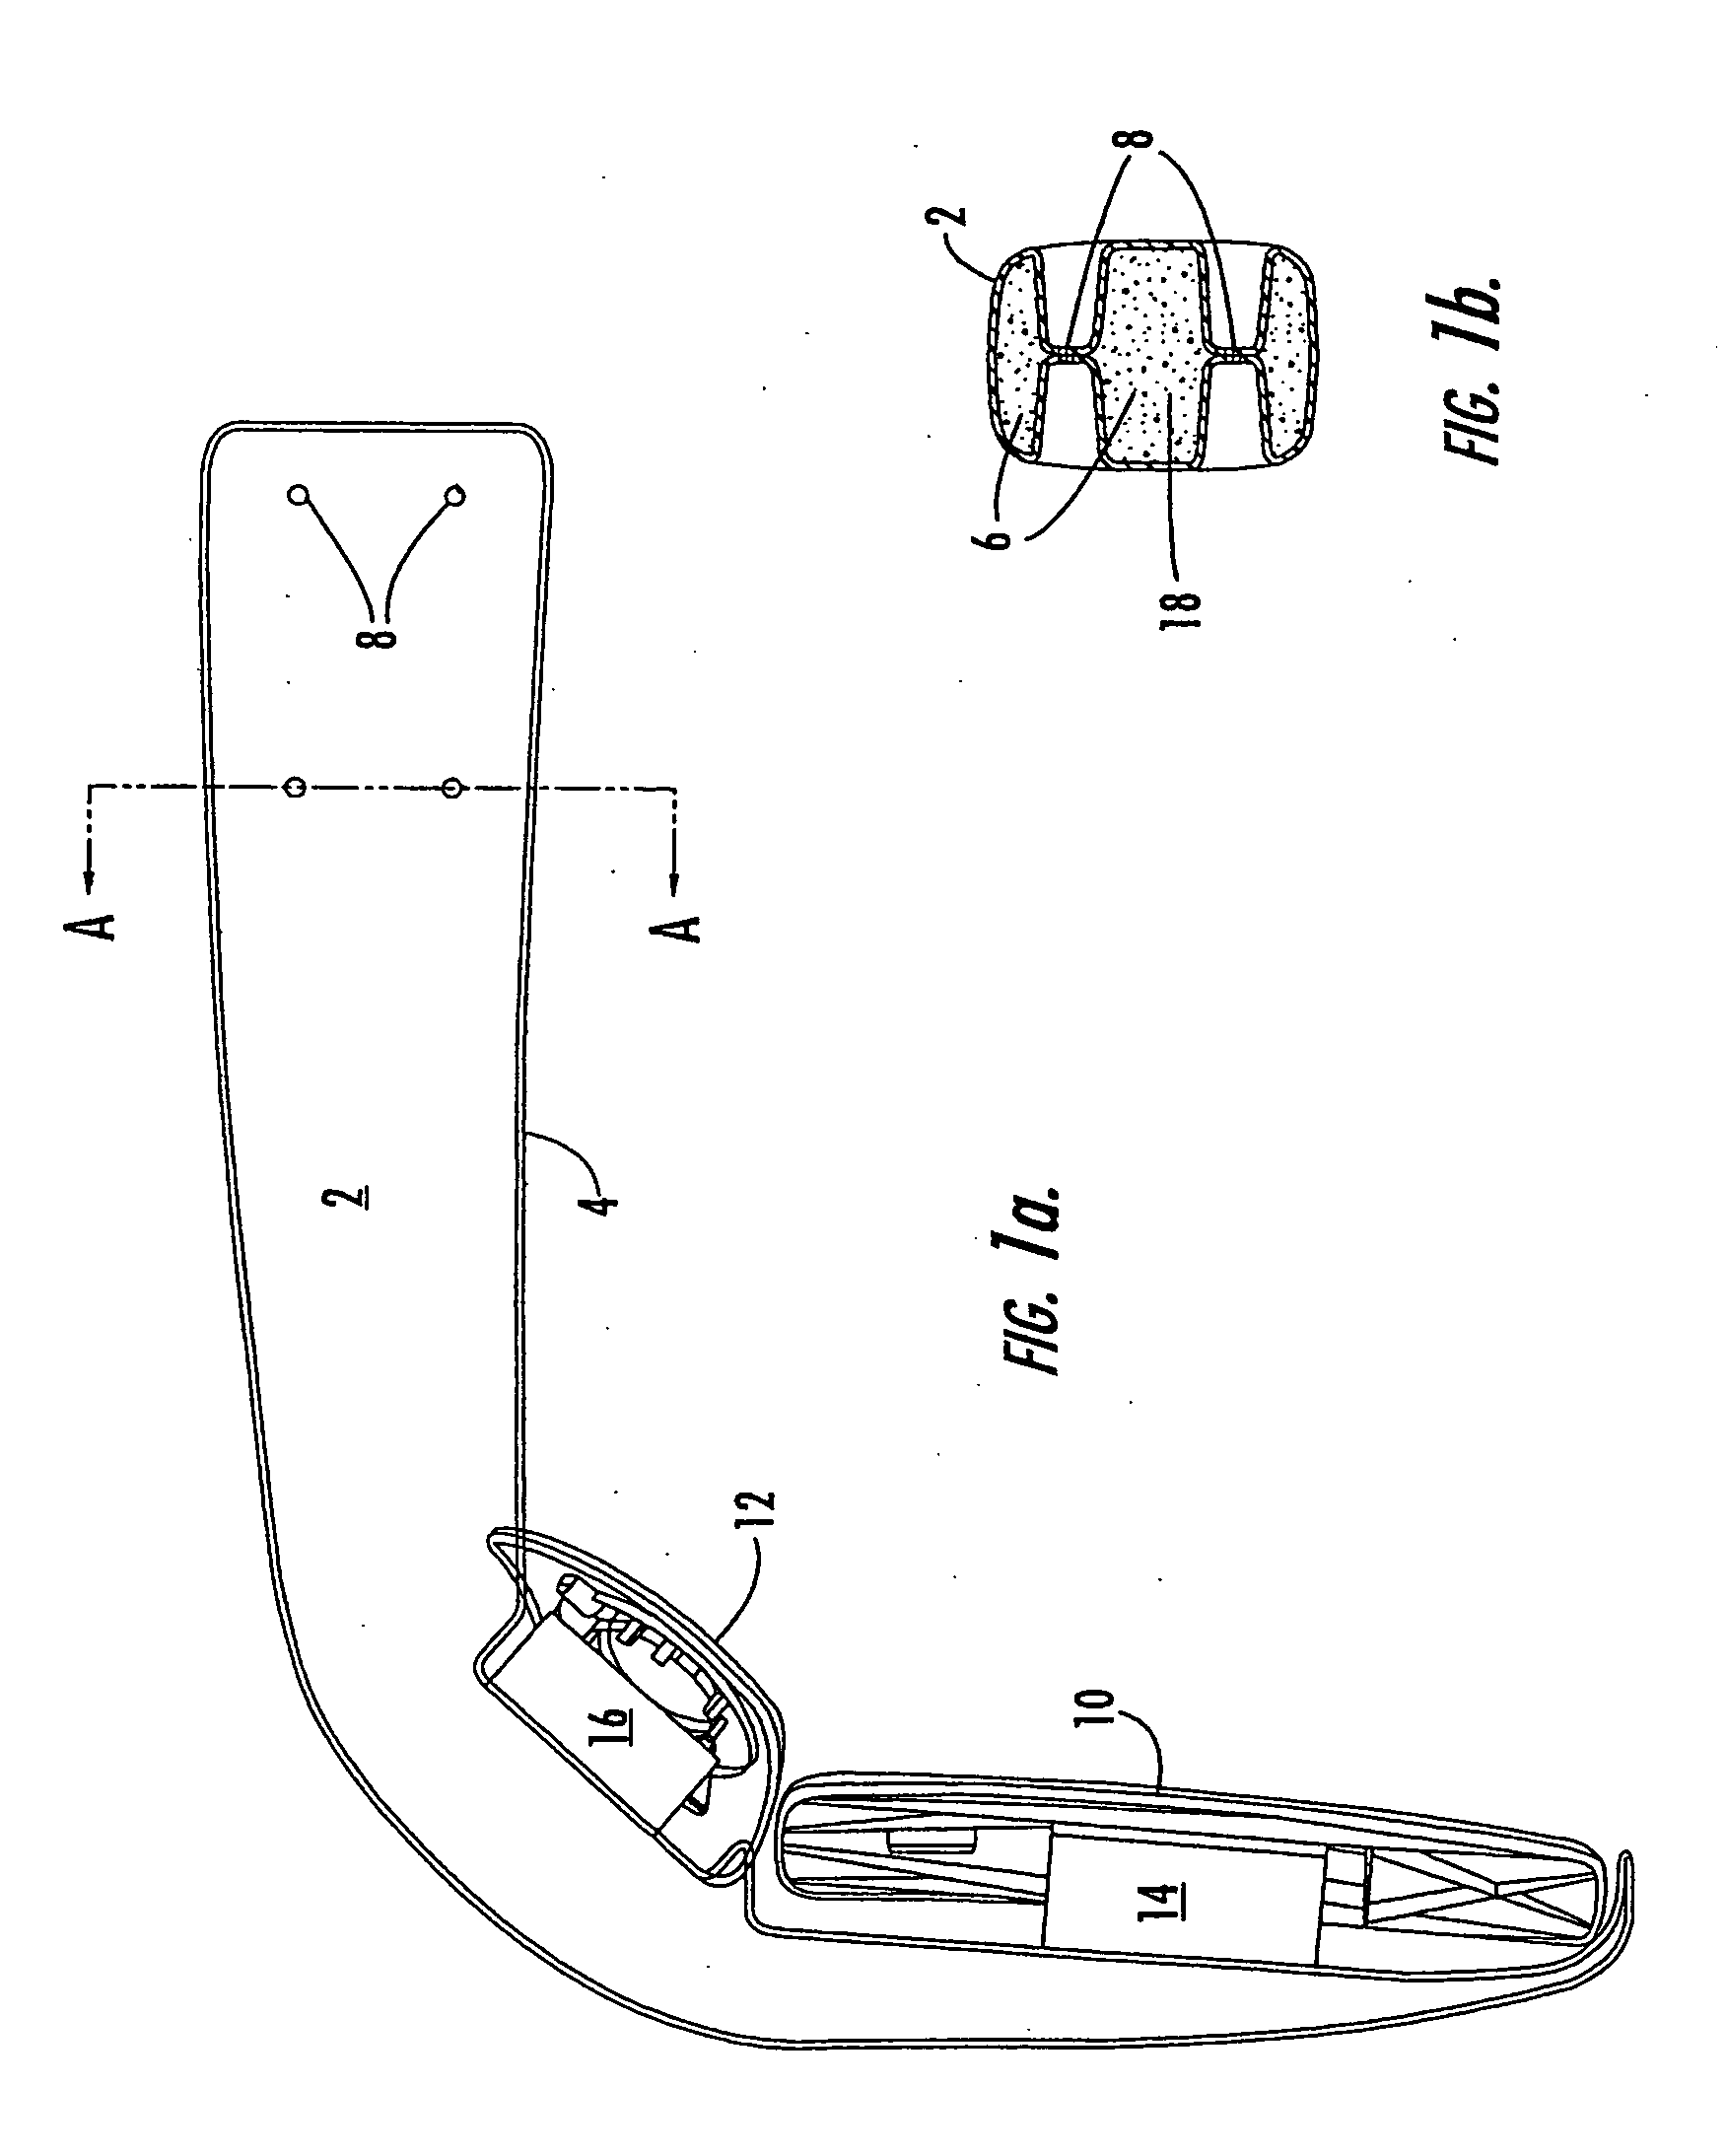 Fillable and stiffened rearview mirror assembly